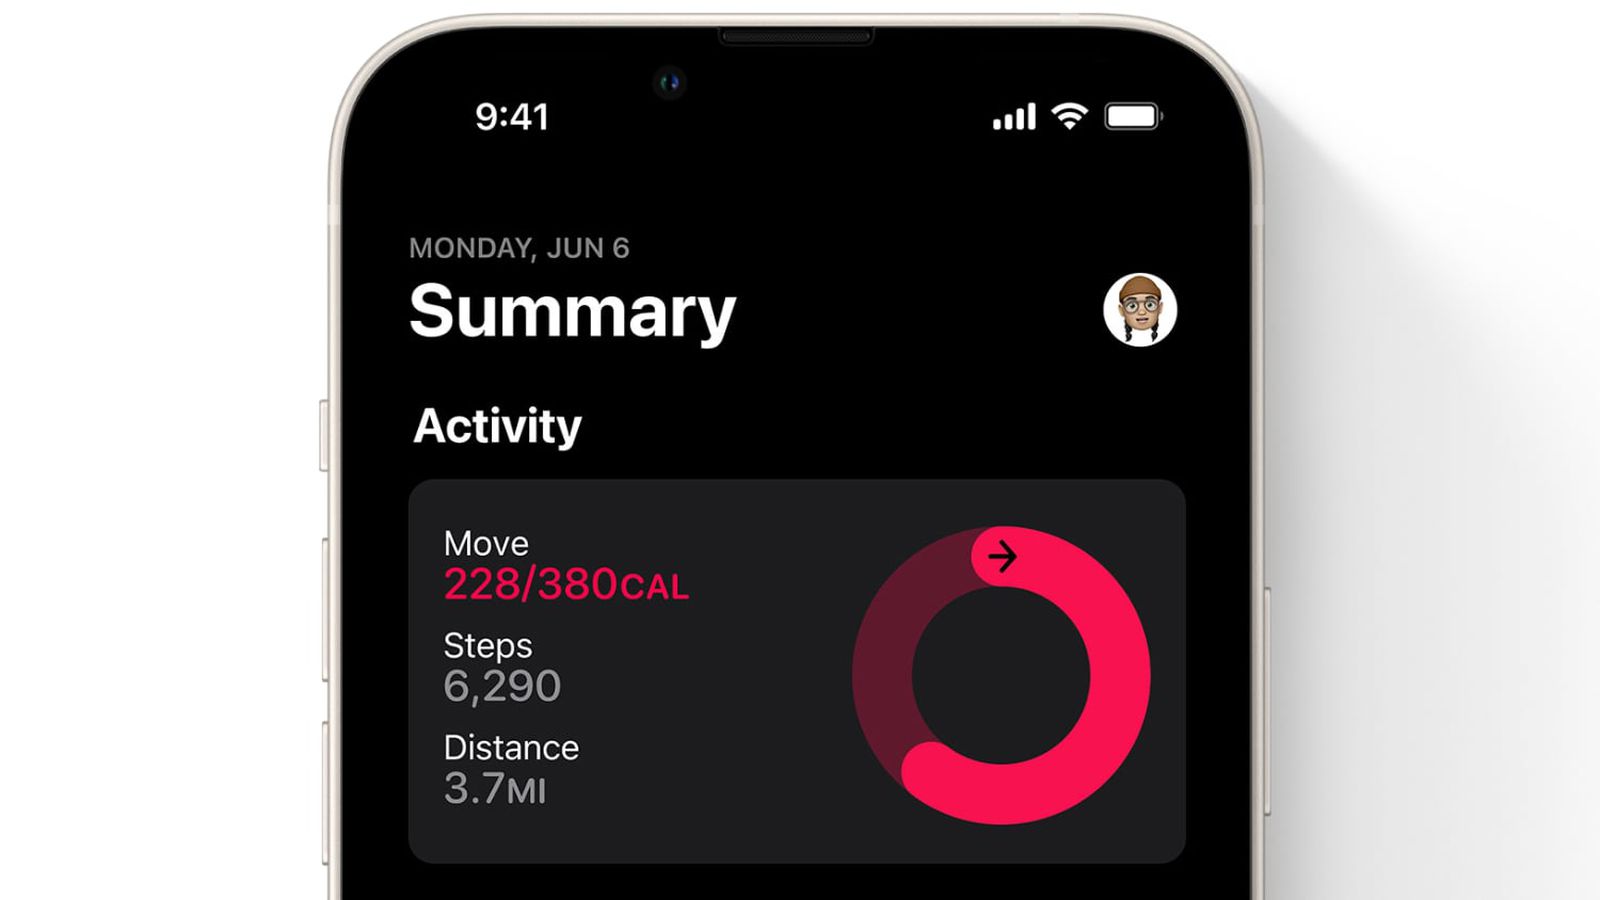 Can Use the iOS Fitness App for Activity Tracking Without an Apple Watch - MacRumors